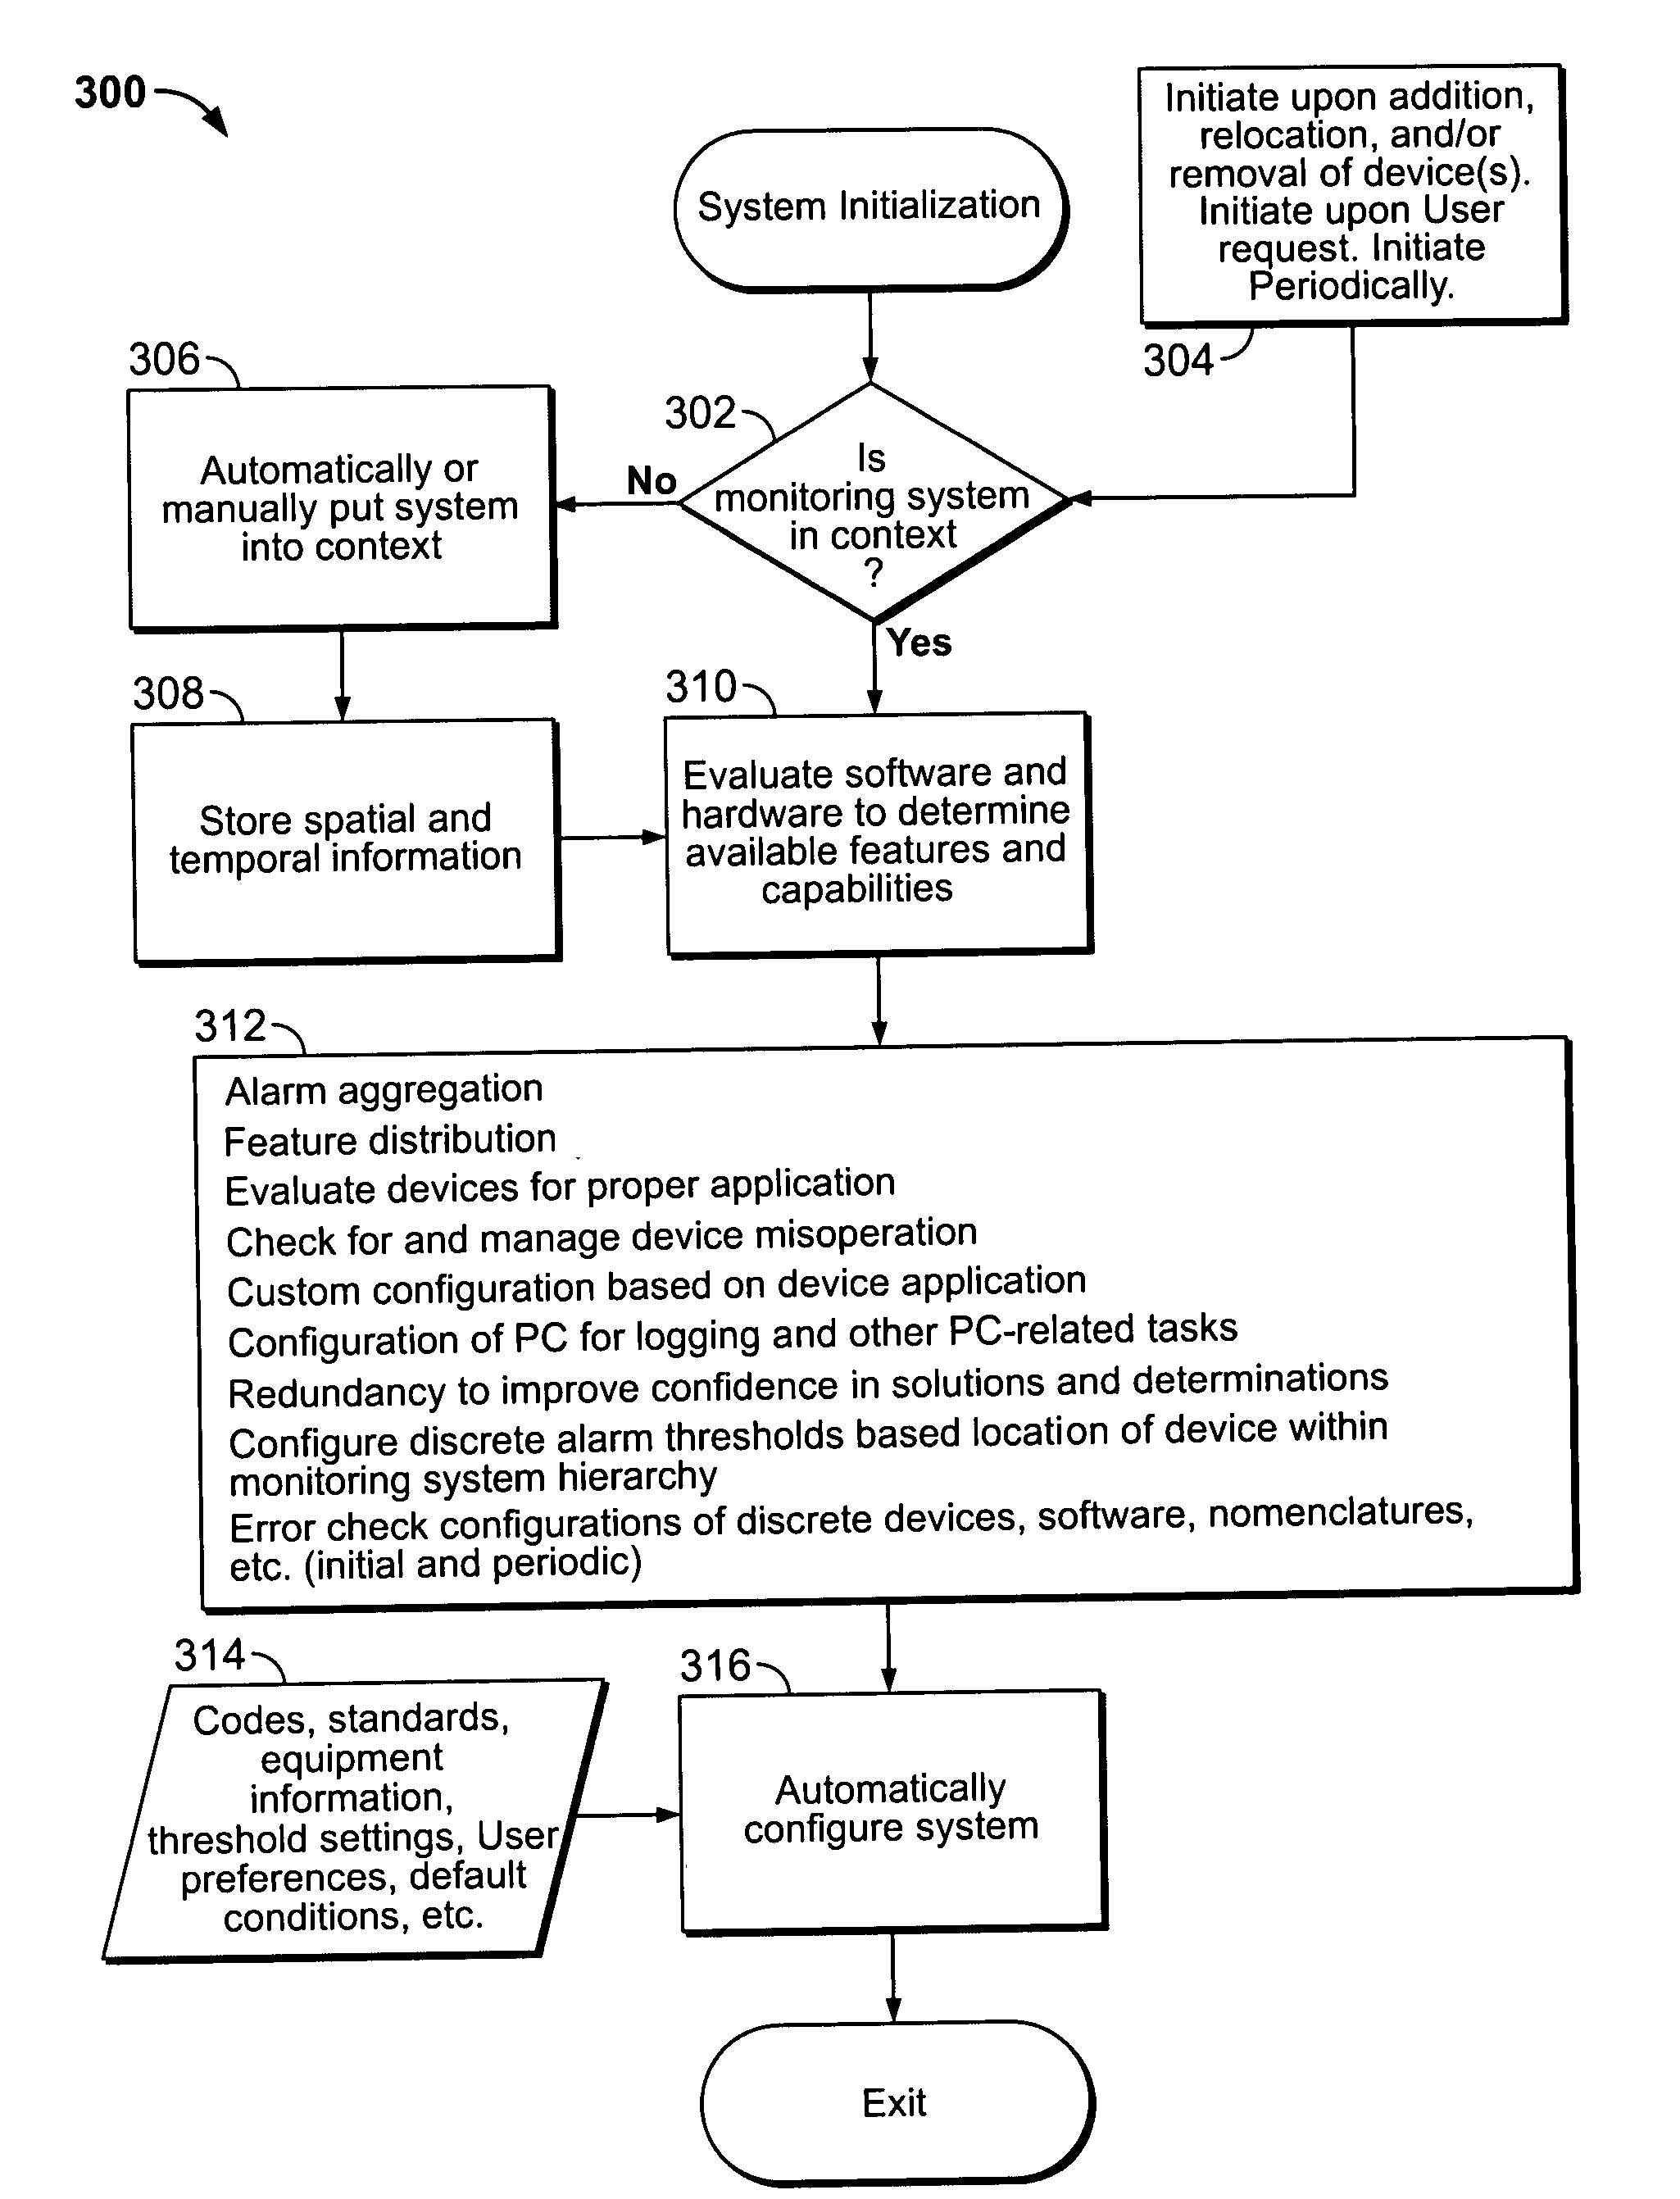 Automated configuration of a power monitoring system using hierarchical context